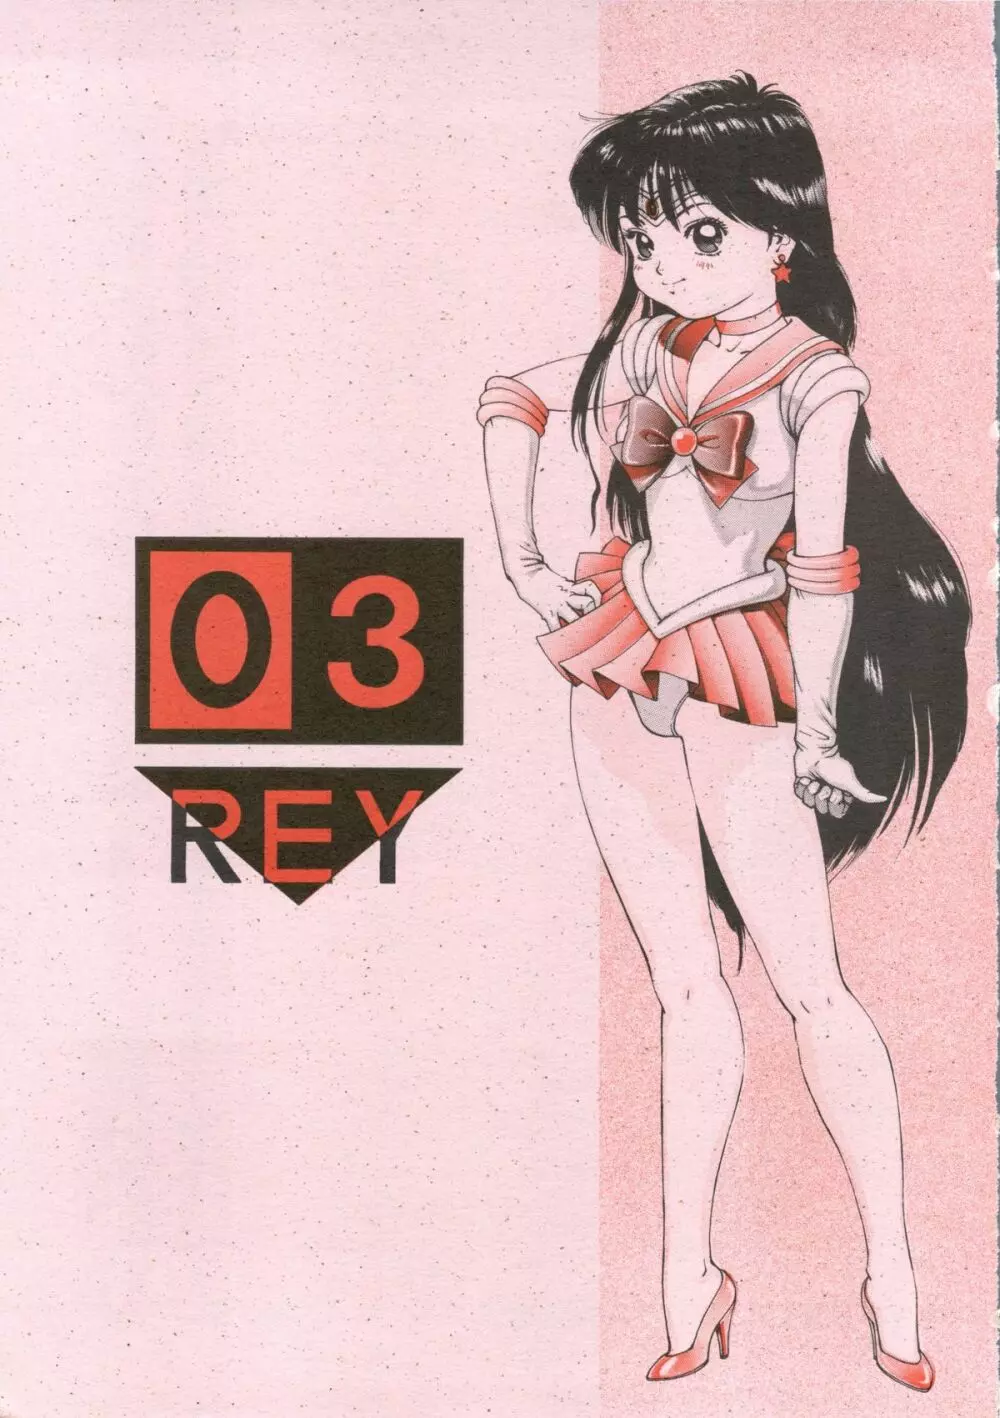 SAILOR MOON MATE 03 REY Page.2